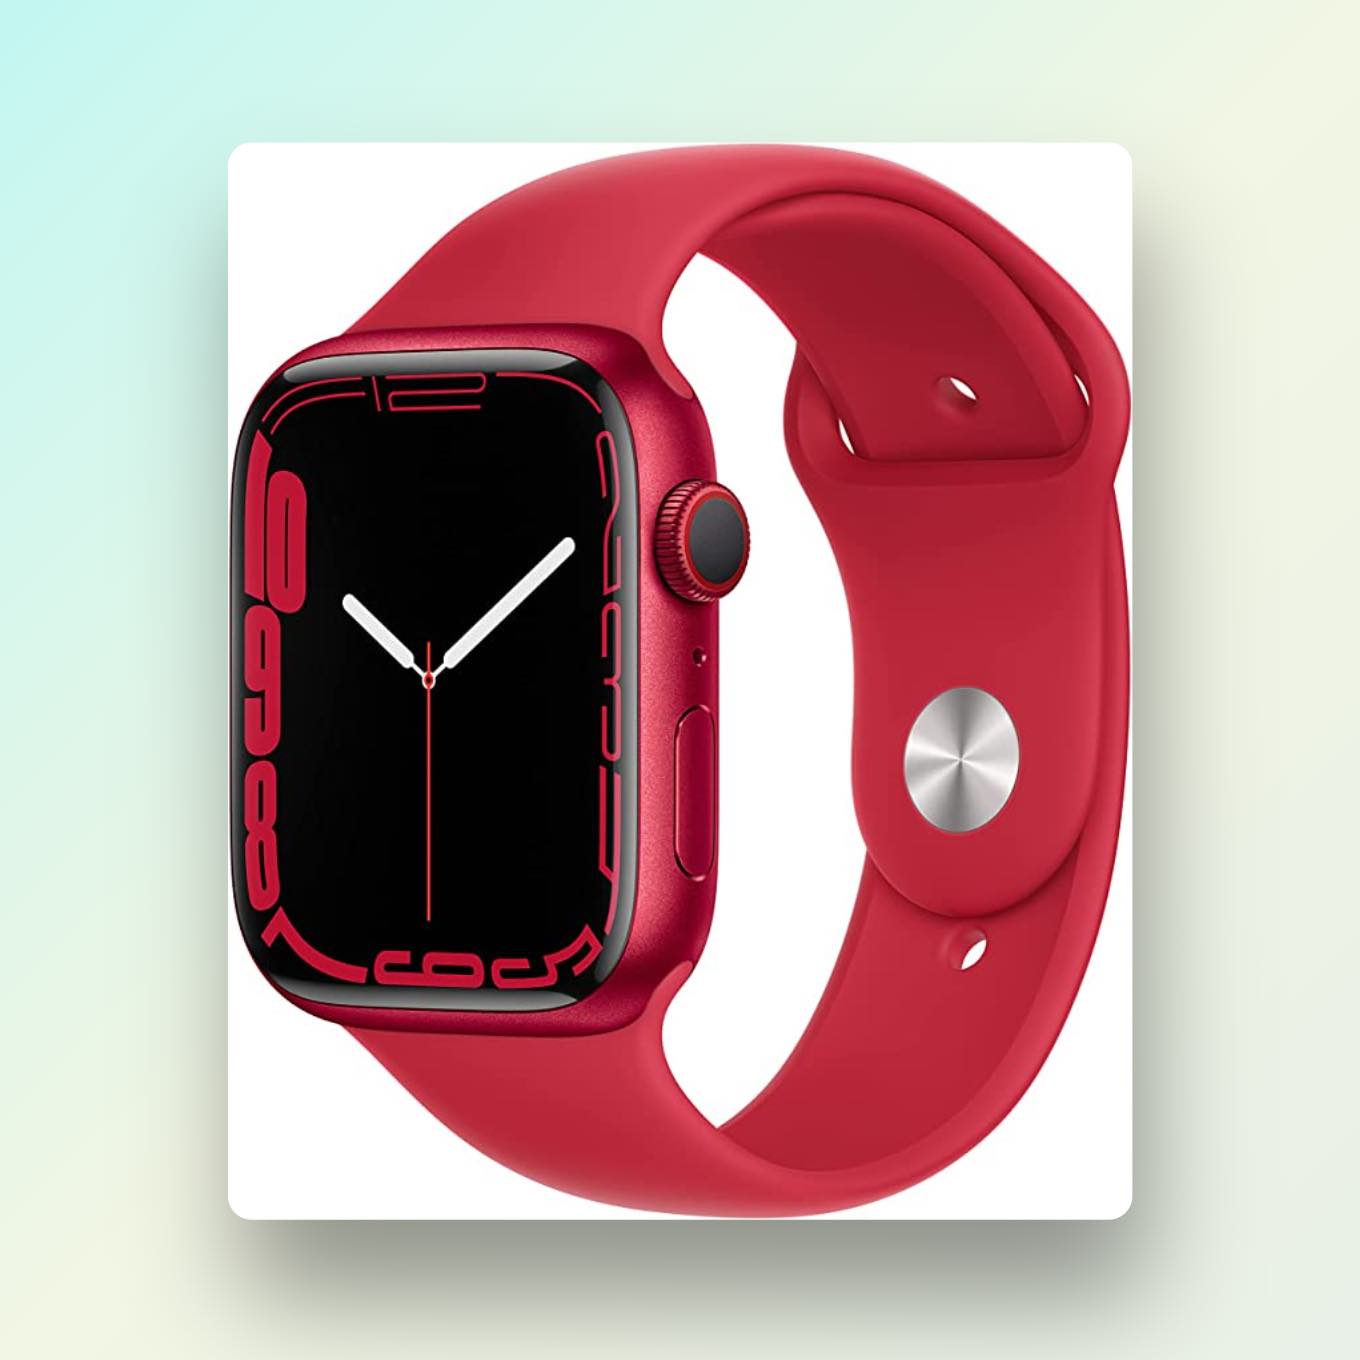 Product (ROOD) Apple Watch met rode band